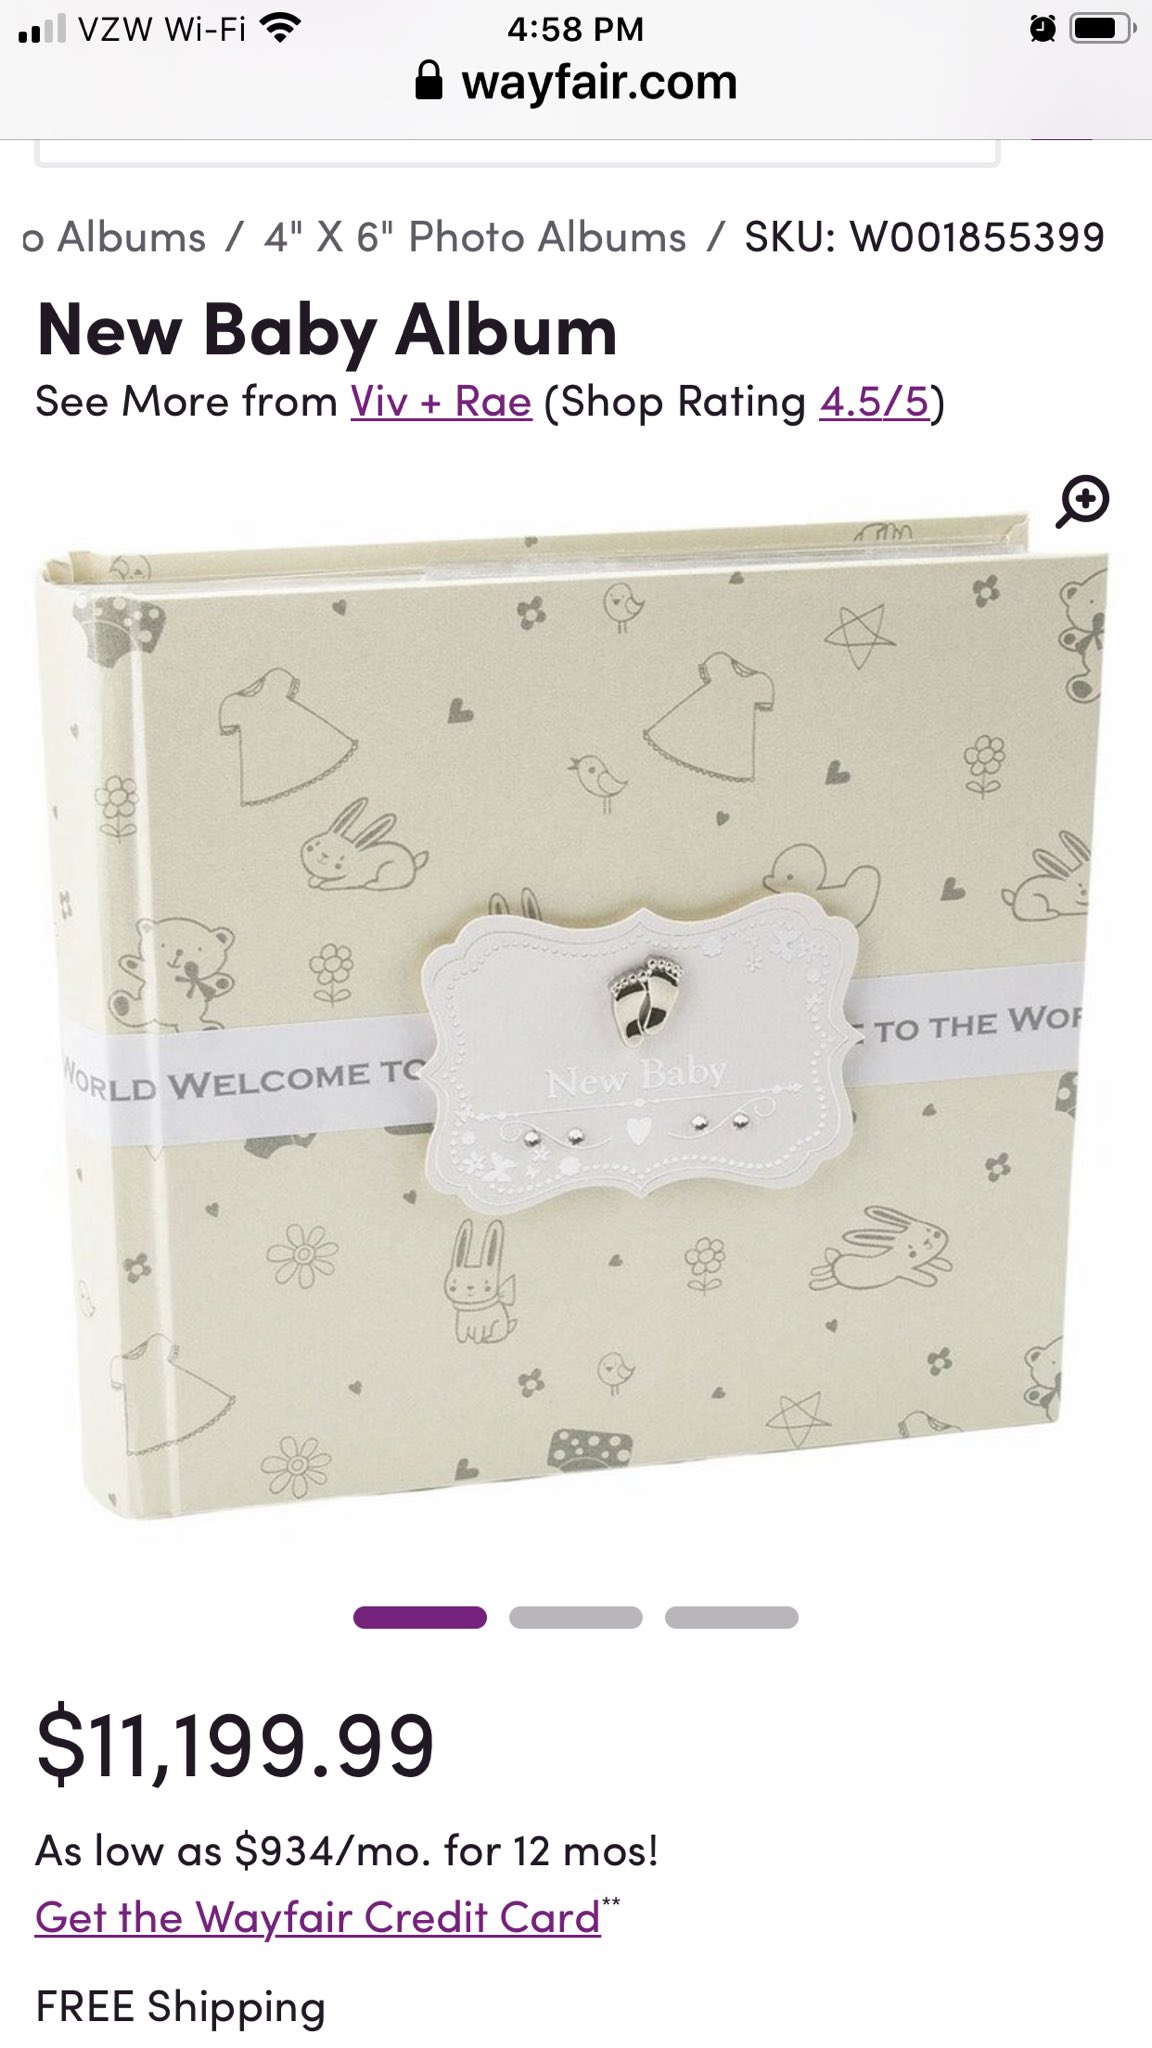 A baby album for $11,199.99